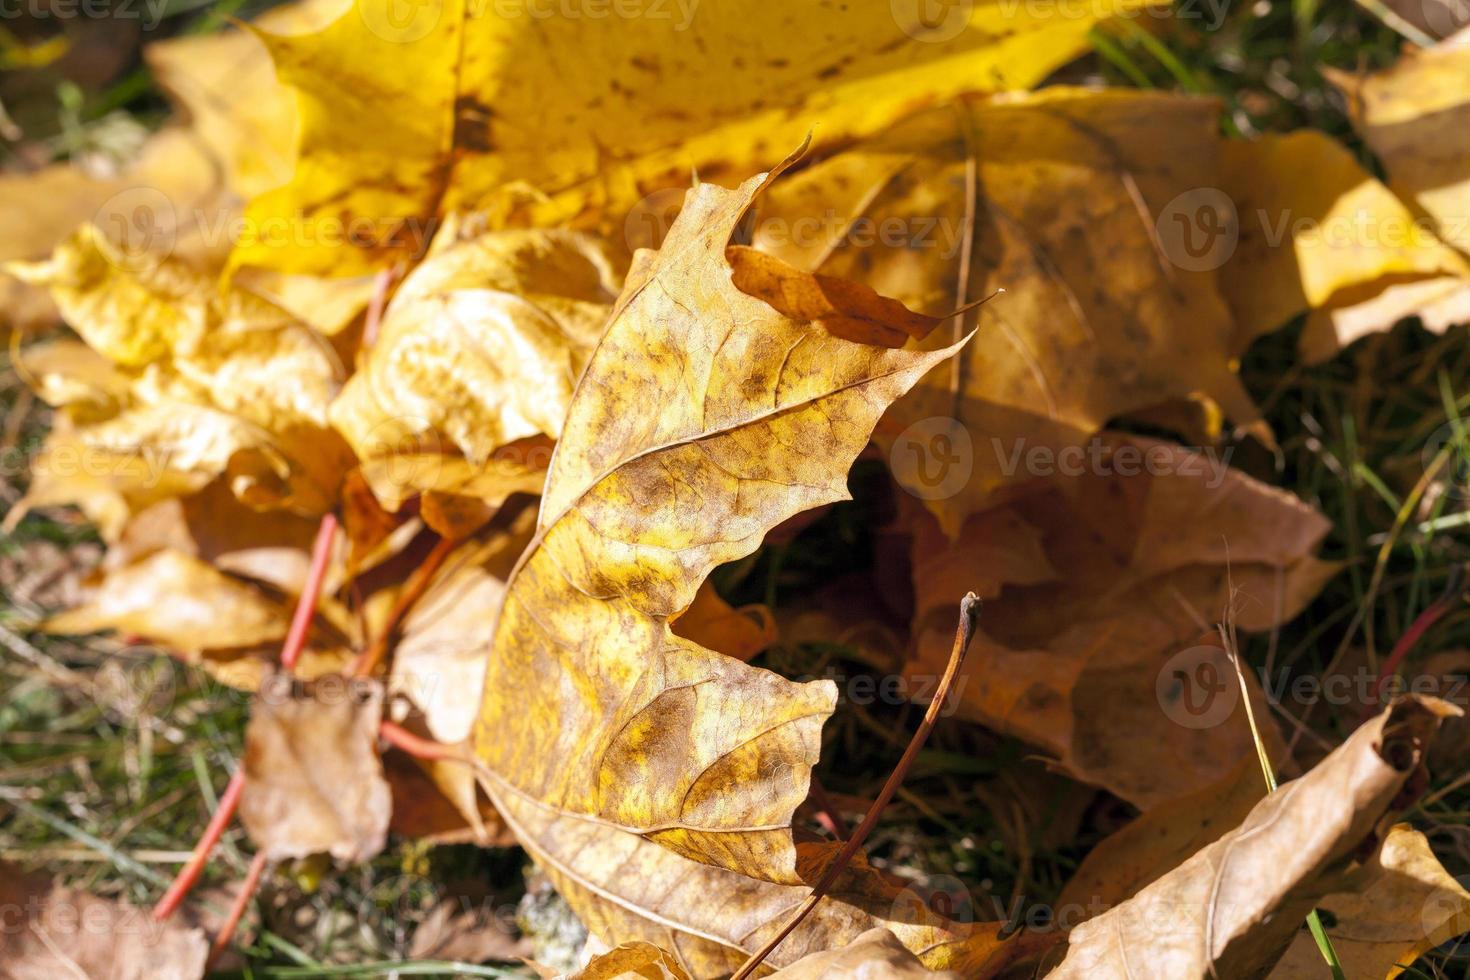 The fallen maple leaves photo